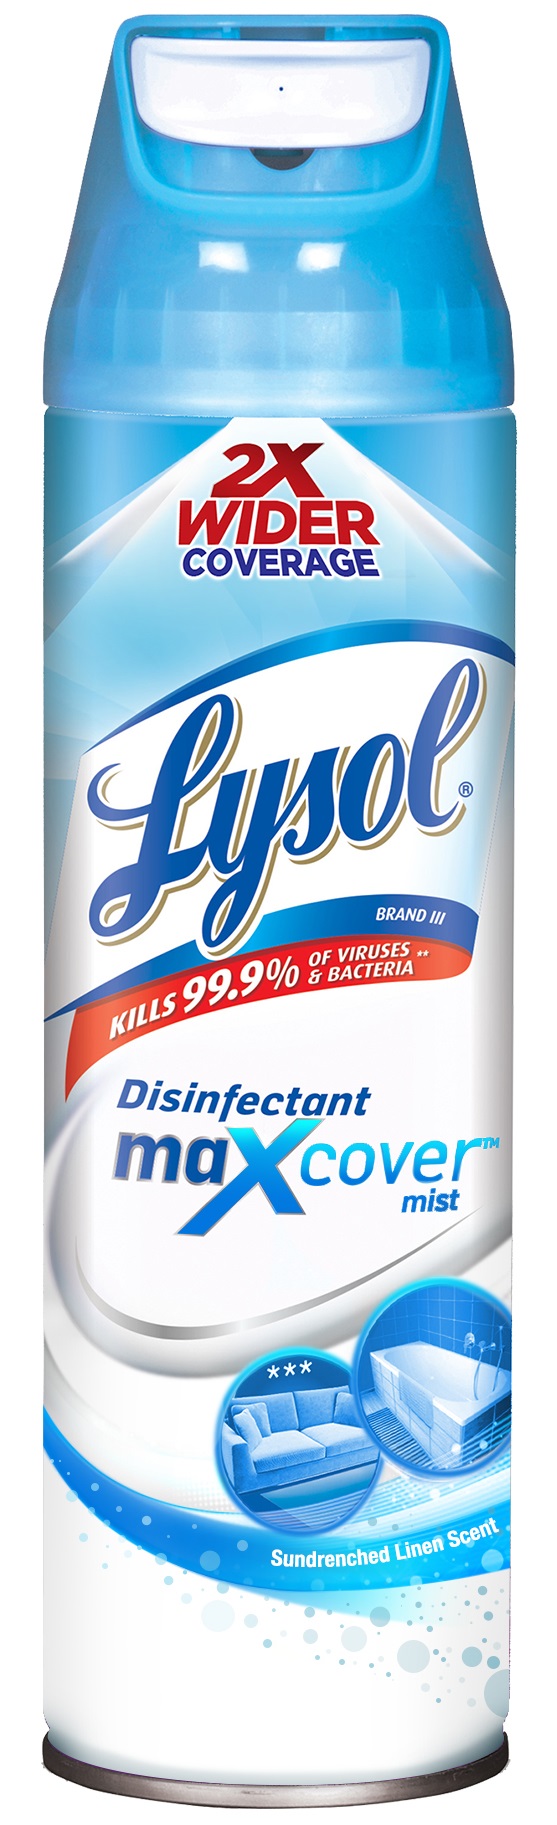 LYSOL® Disinfectant Max Cover Mist - Sundrenched Linen (Discontinued June 2021)